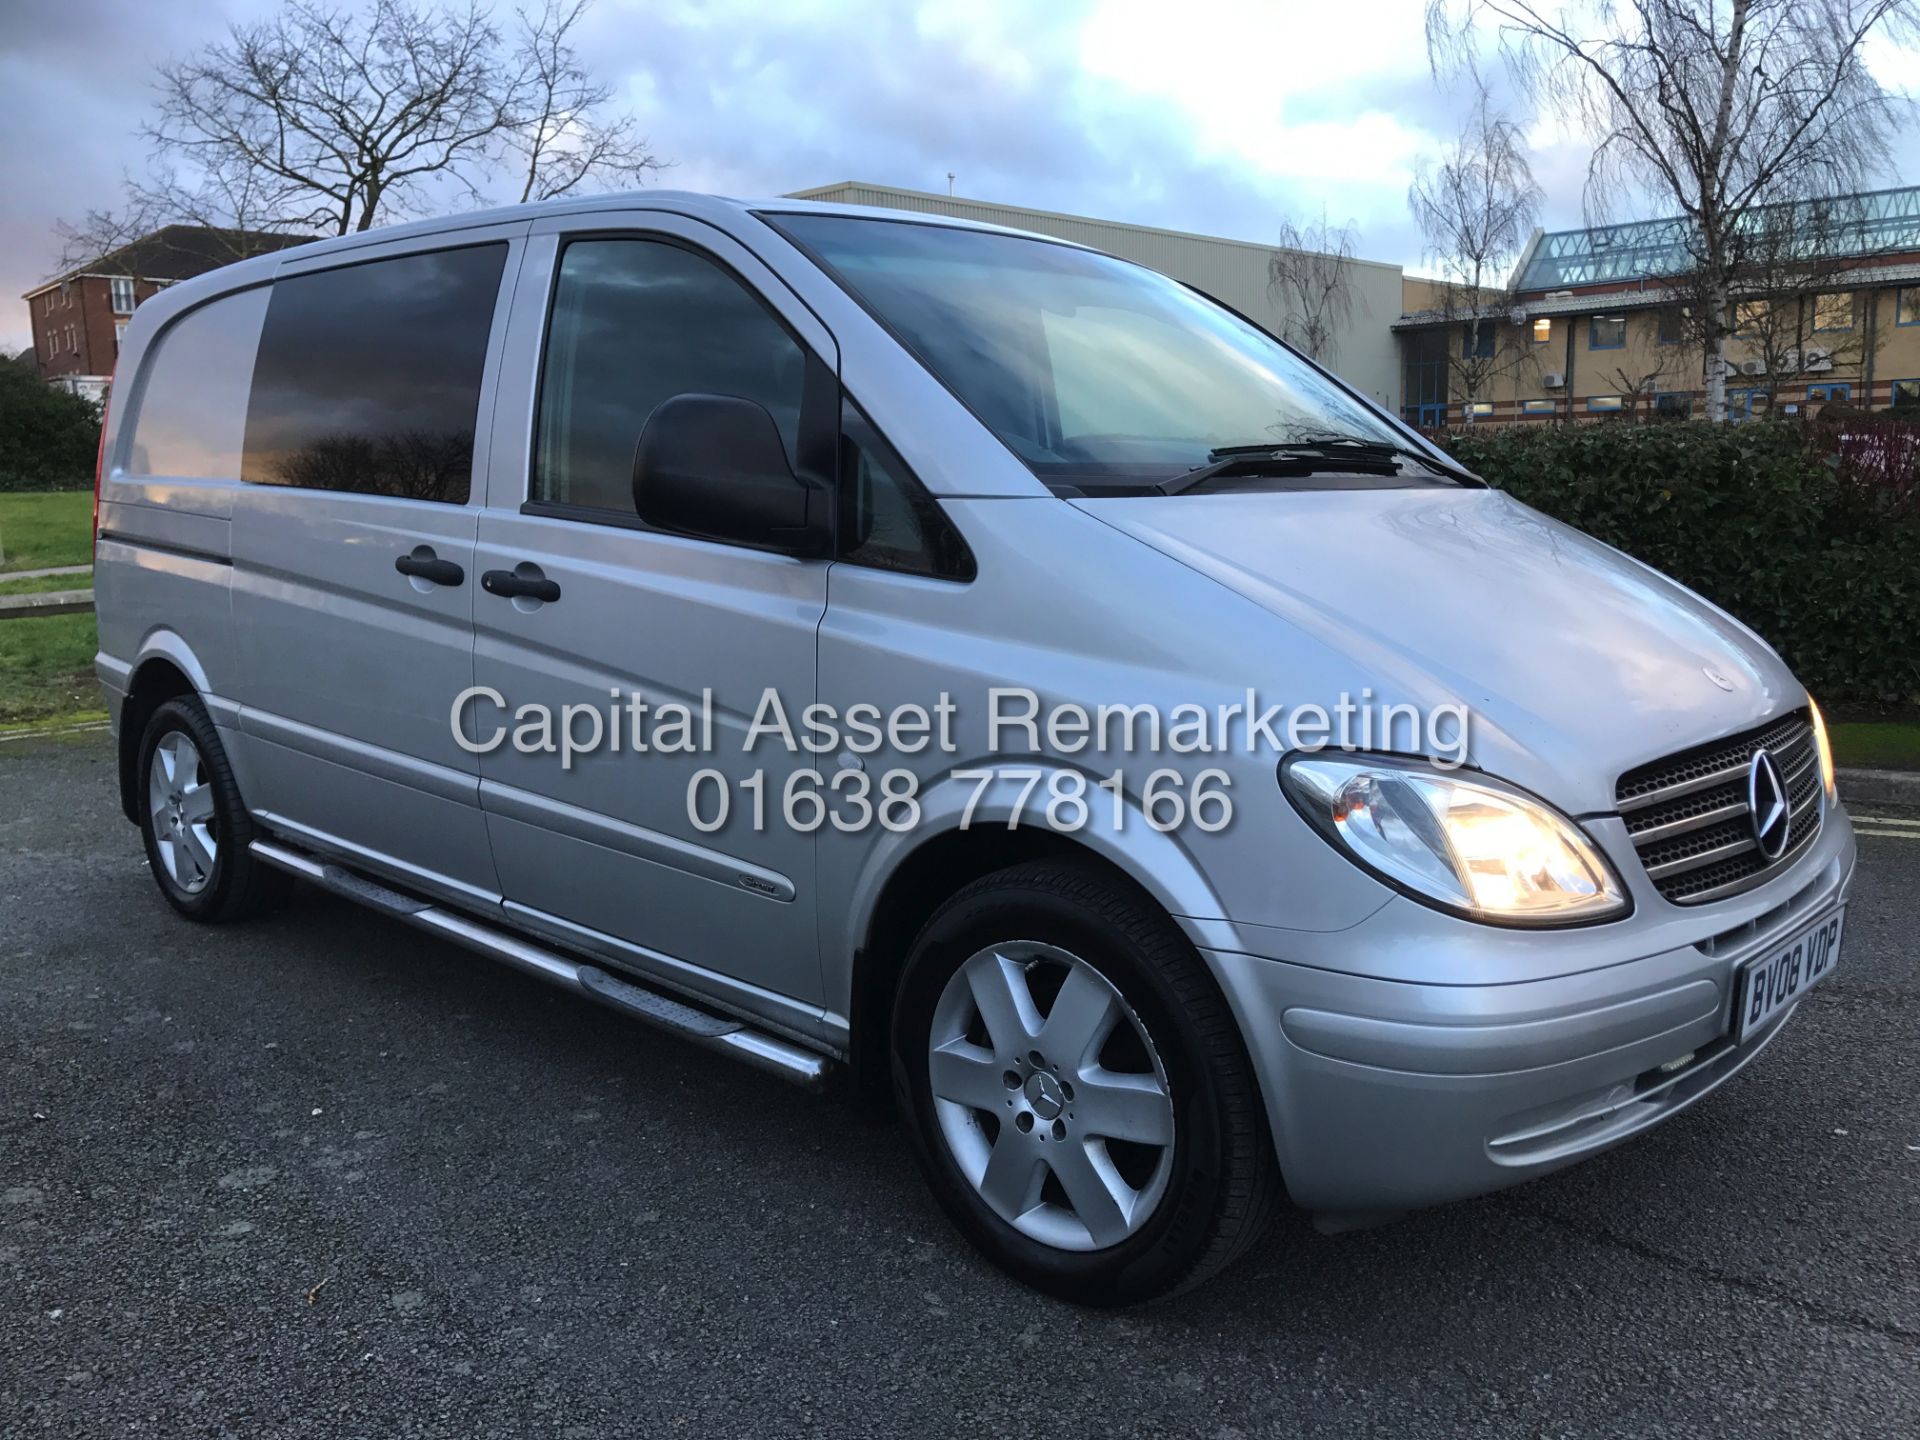 (ON SALE) MERCEDES VITO 3.0V6 "120CDI SPORT" AUTO (08 REG) 6 SEATER - 1 OWNER - AIR CON - CRUISE - Image 4 of 20